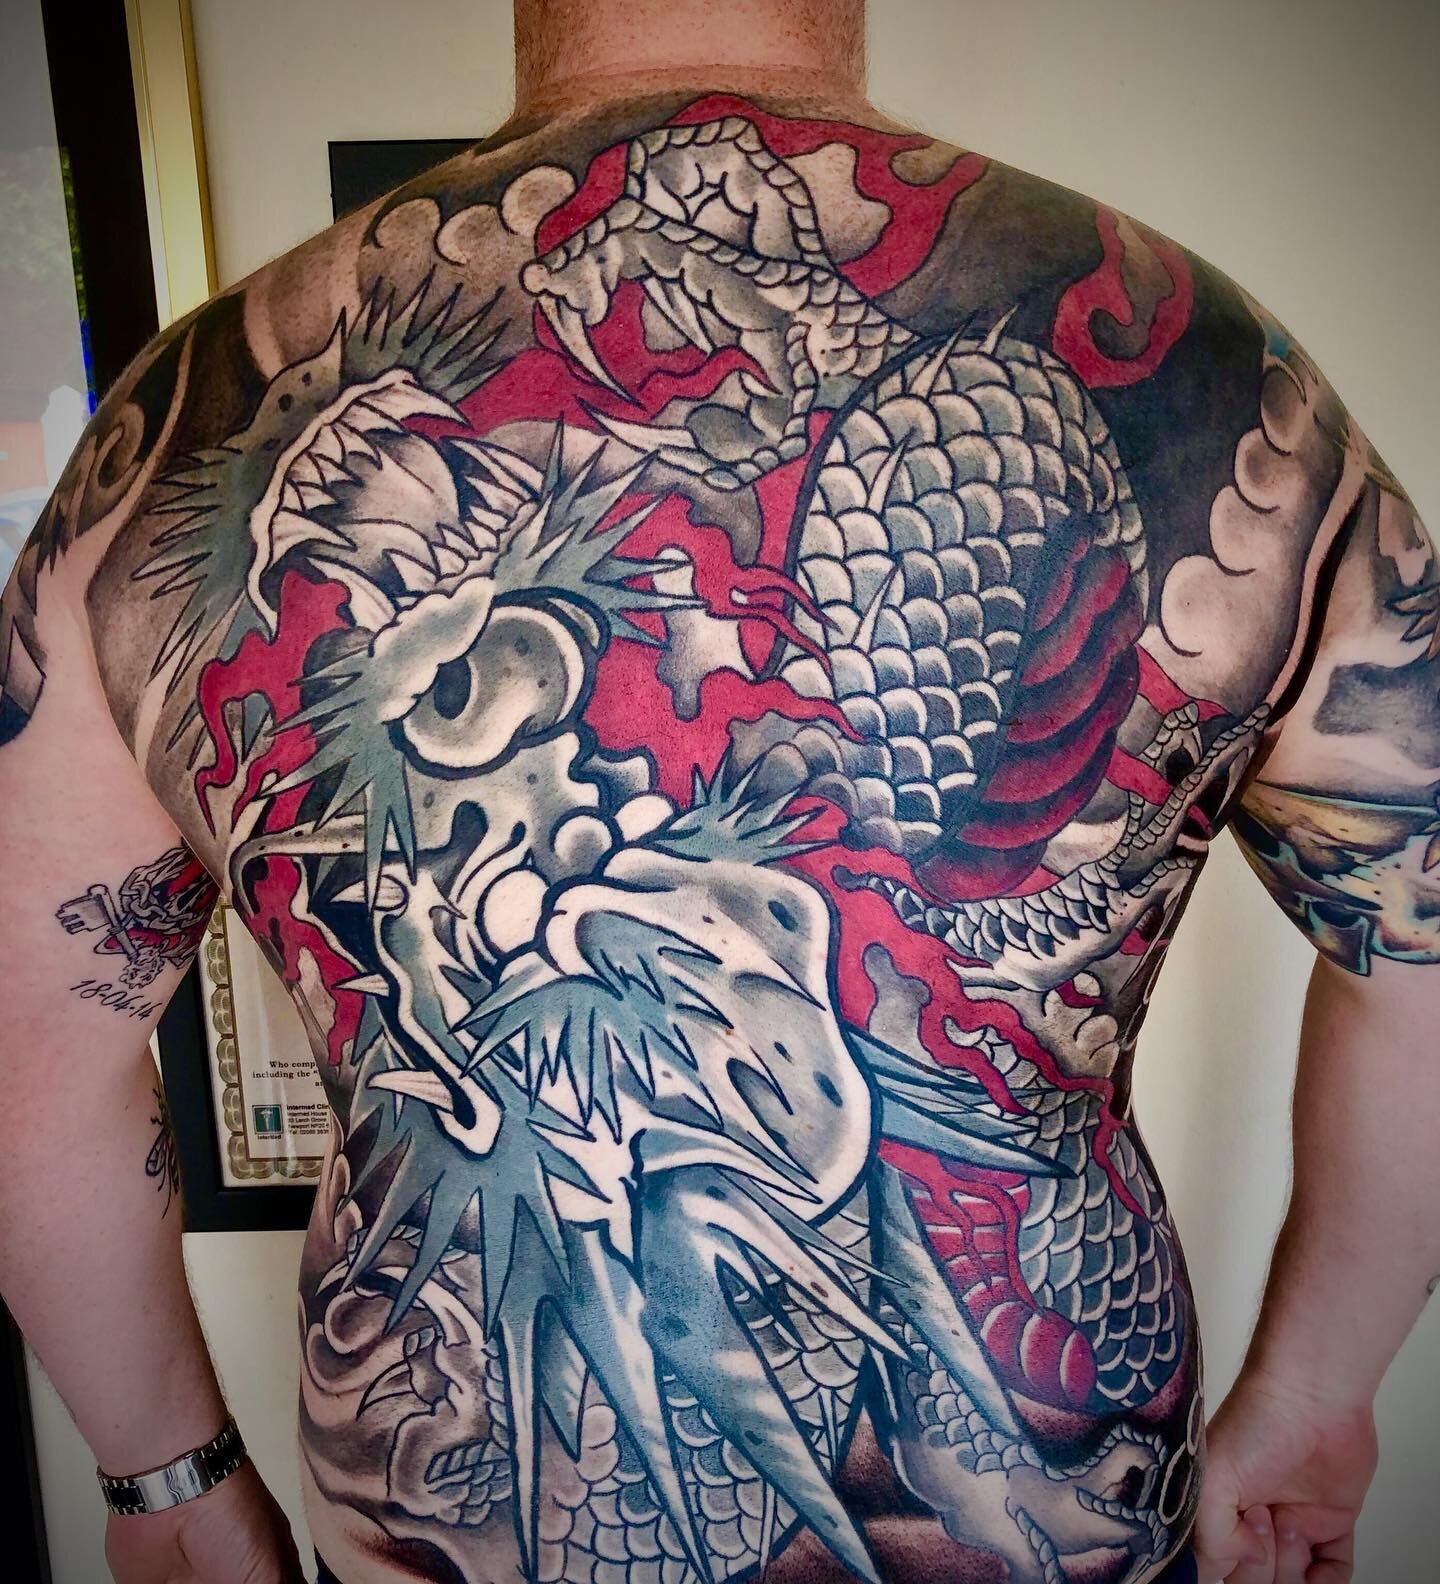 Great first day back at work finishing my friends dragon coverup backpiece. #japanesetattoo #japanesetattoos #dragontattoo #dragon #backpiece #72tattoo #manchester